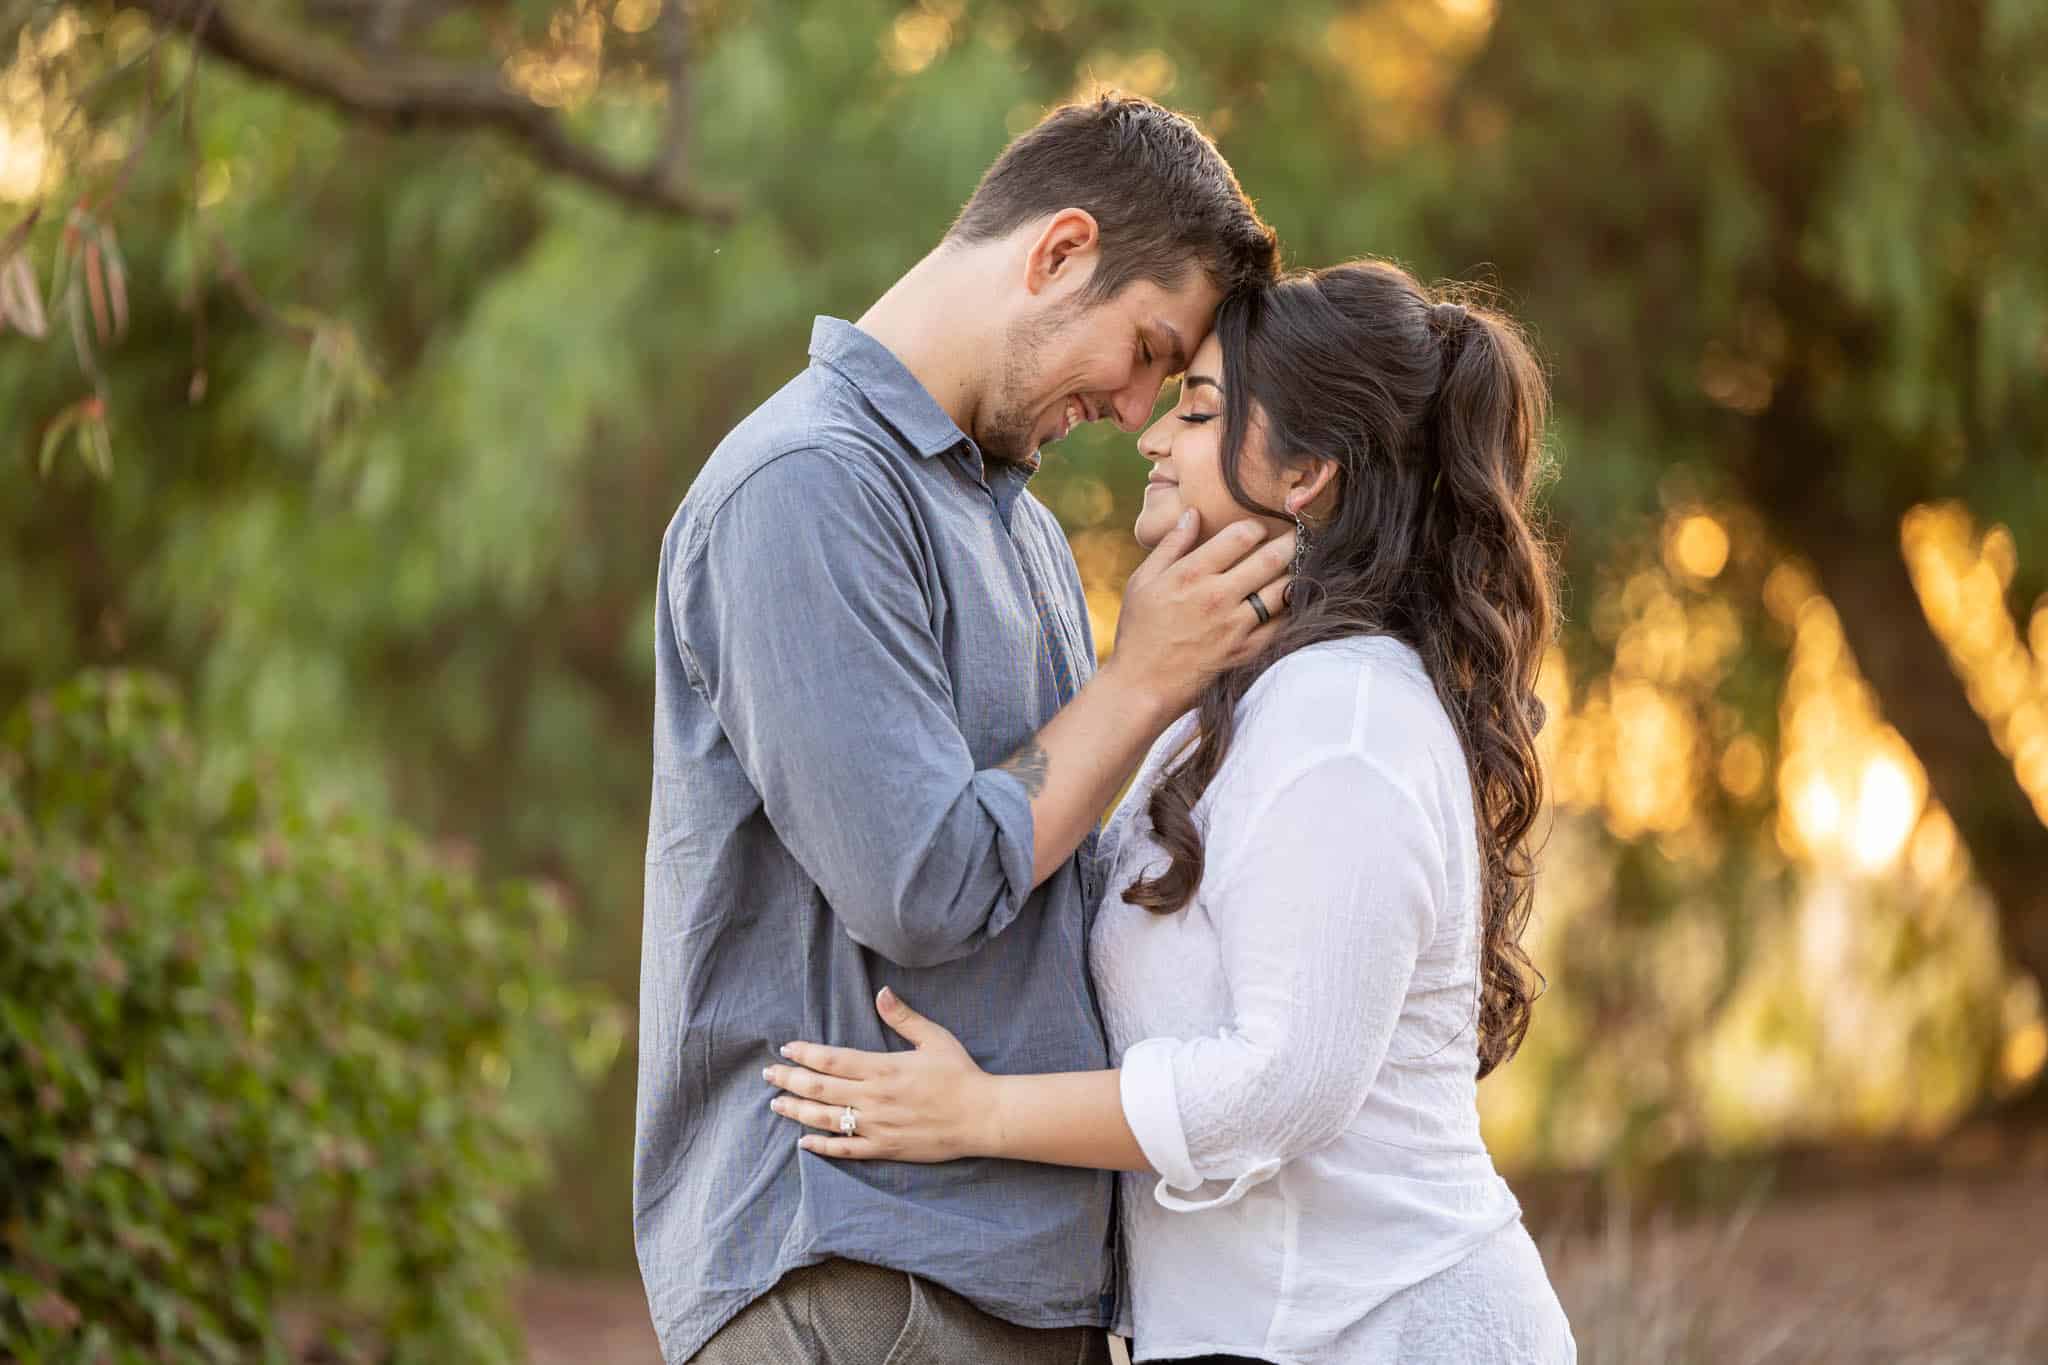 Thousand Oaks wedding photographer captures man and woman embracing as the man holds the womans face